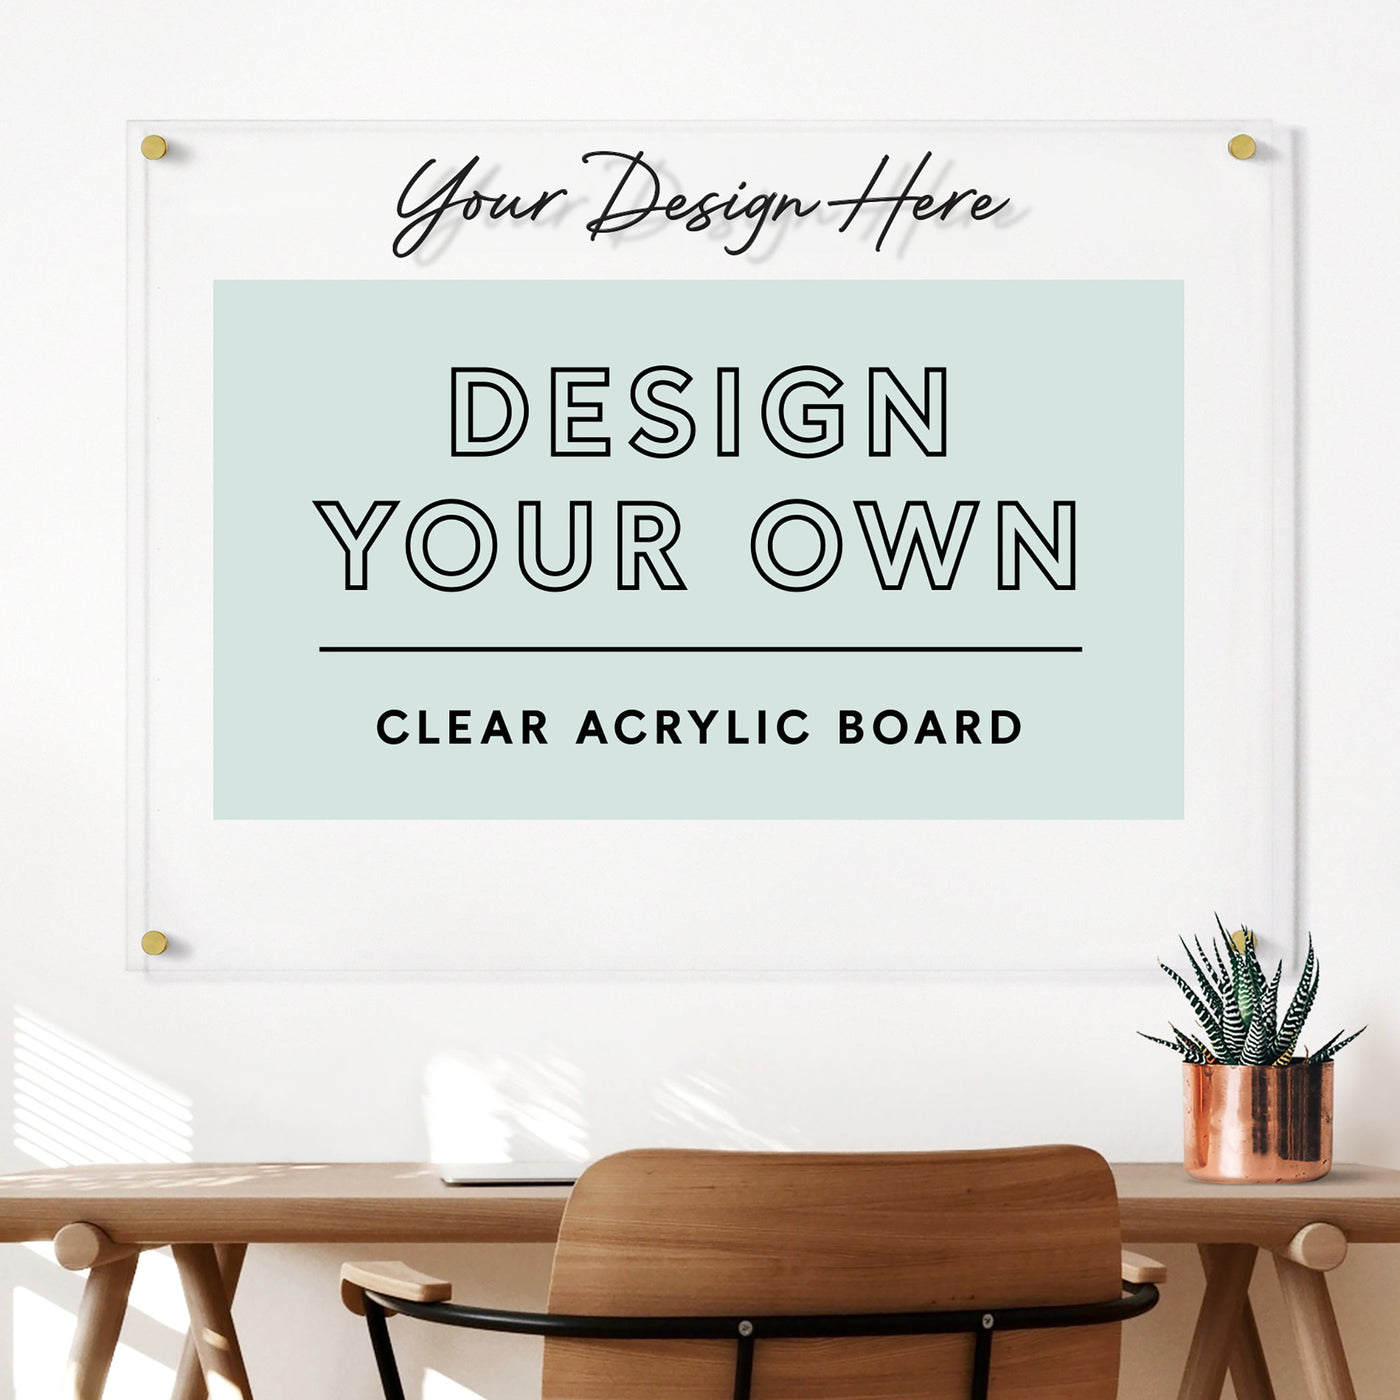 DESIGN YOUR OWN board - Horizontal clear acrylic